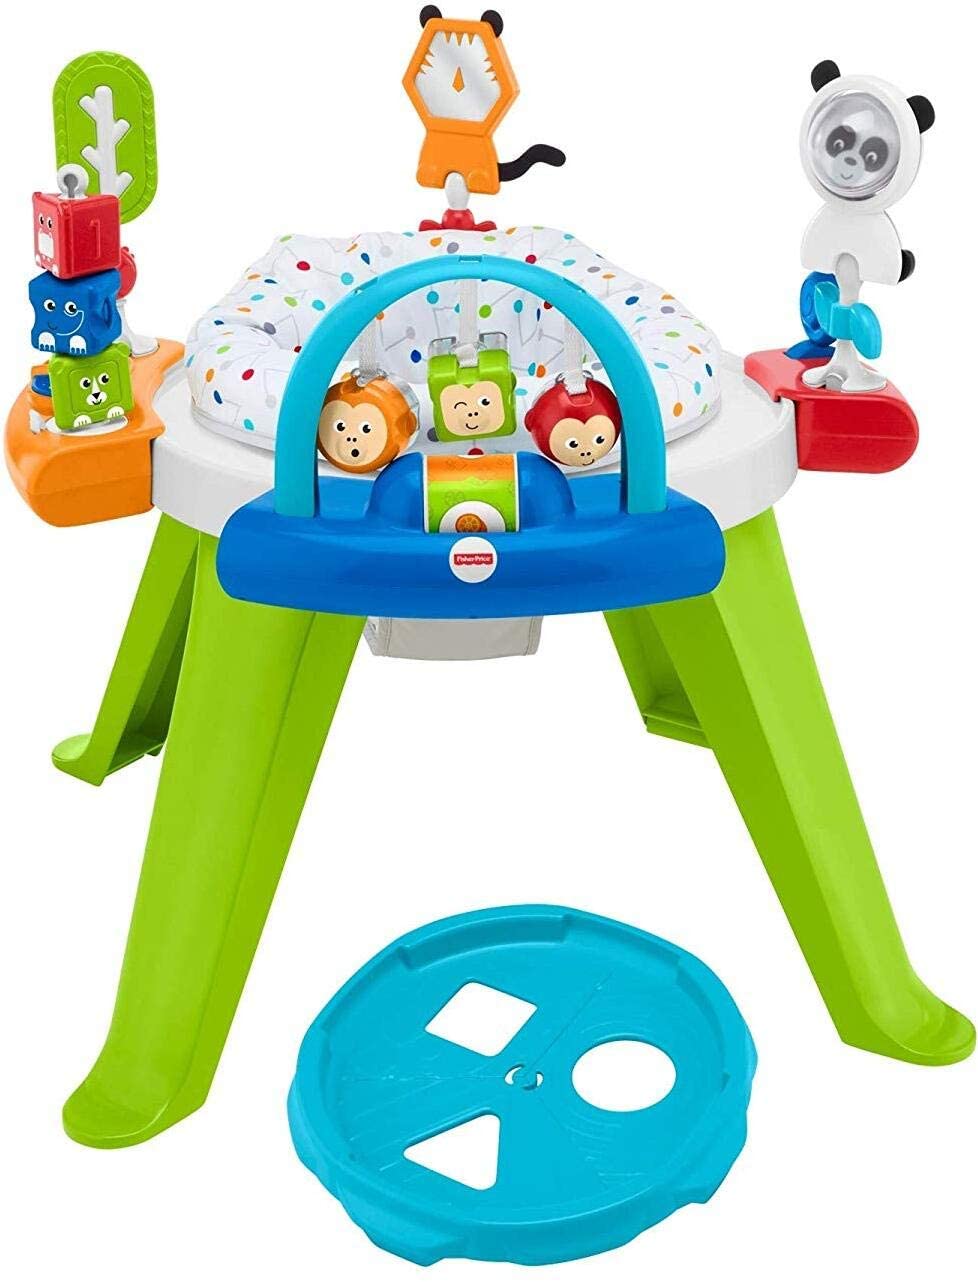 Fisher Price 3-In-1 Spin & Sort Activity Center